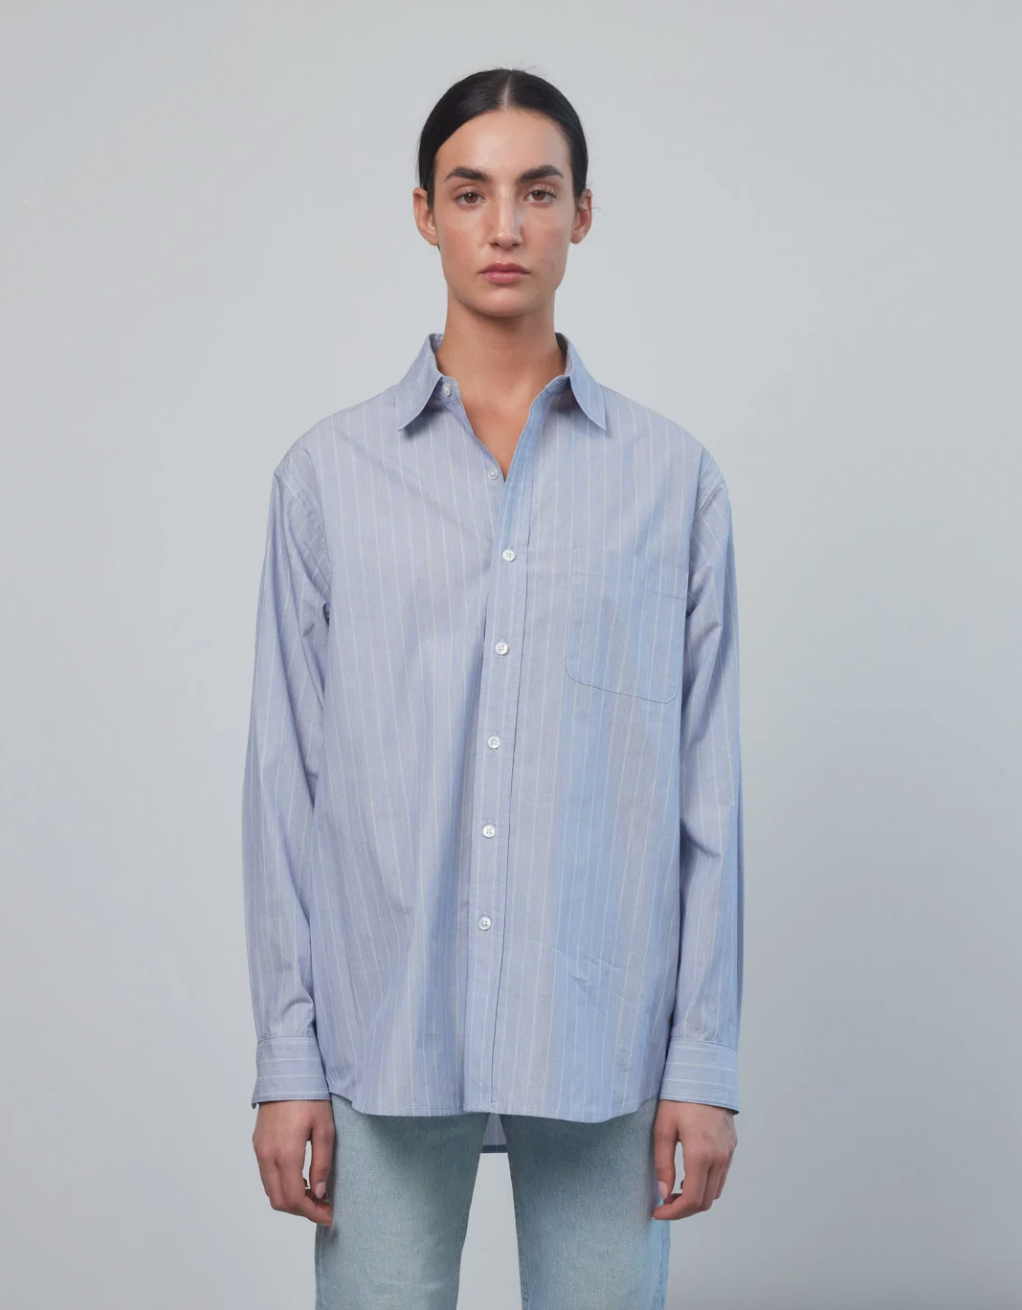 Product Image for Nolan Shirt, Striped Primary Blue